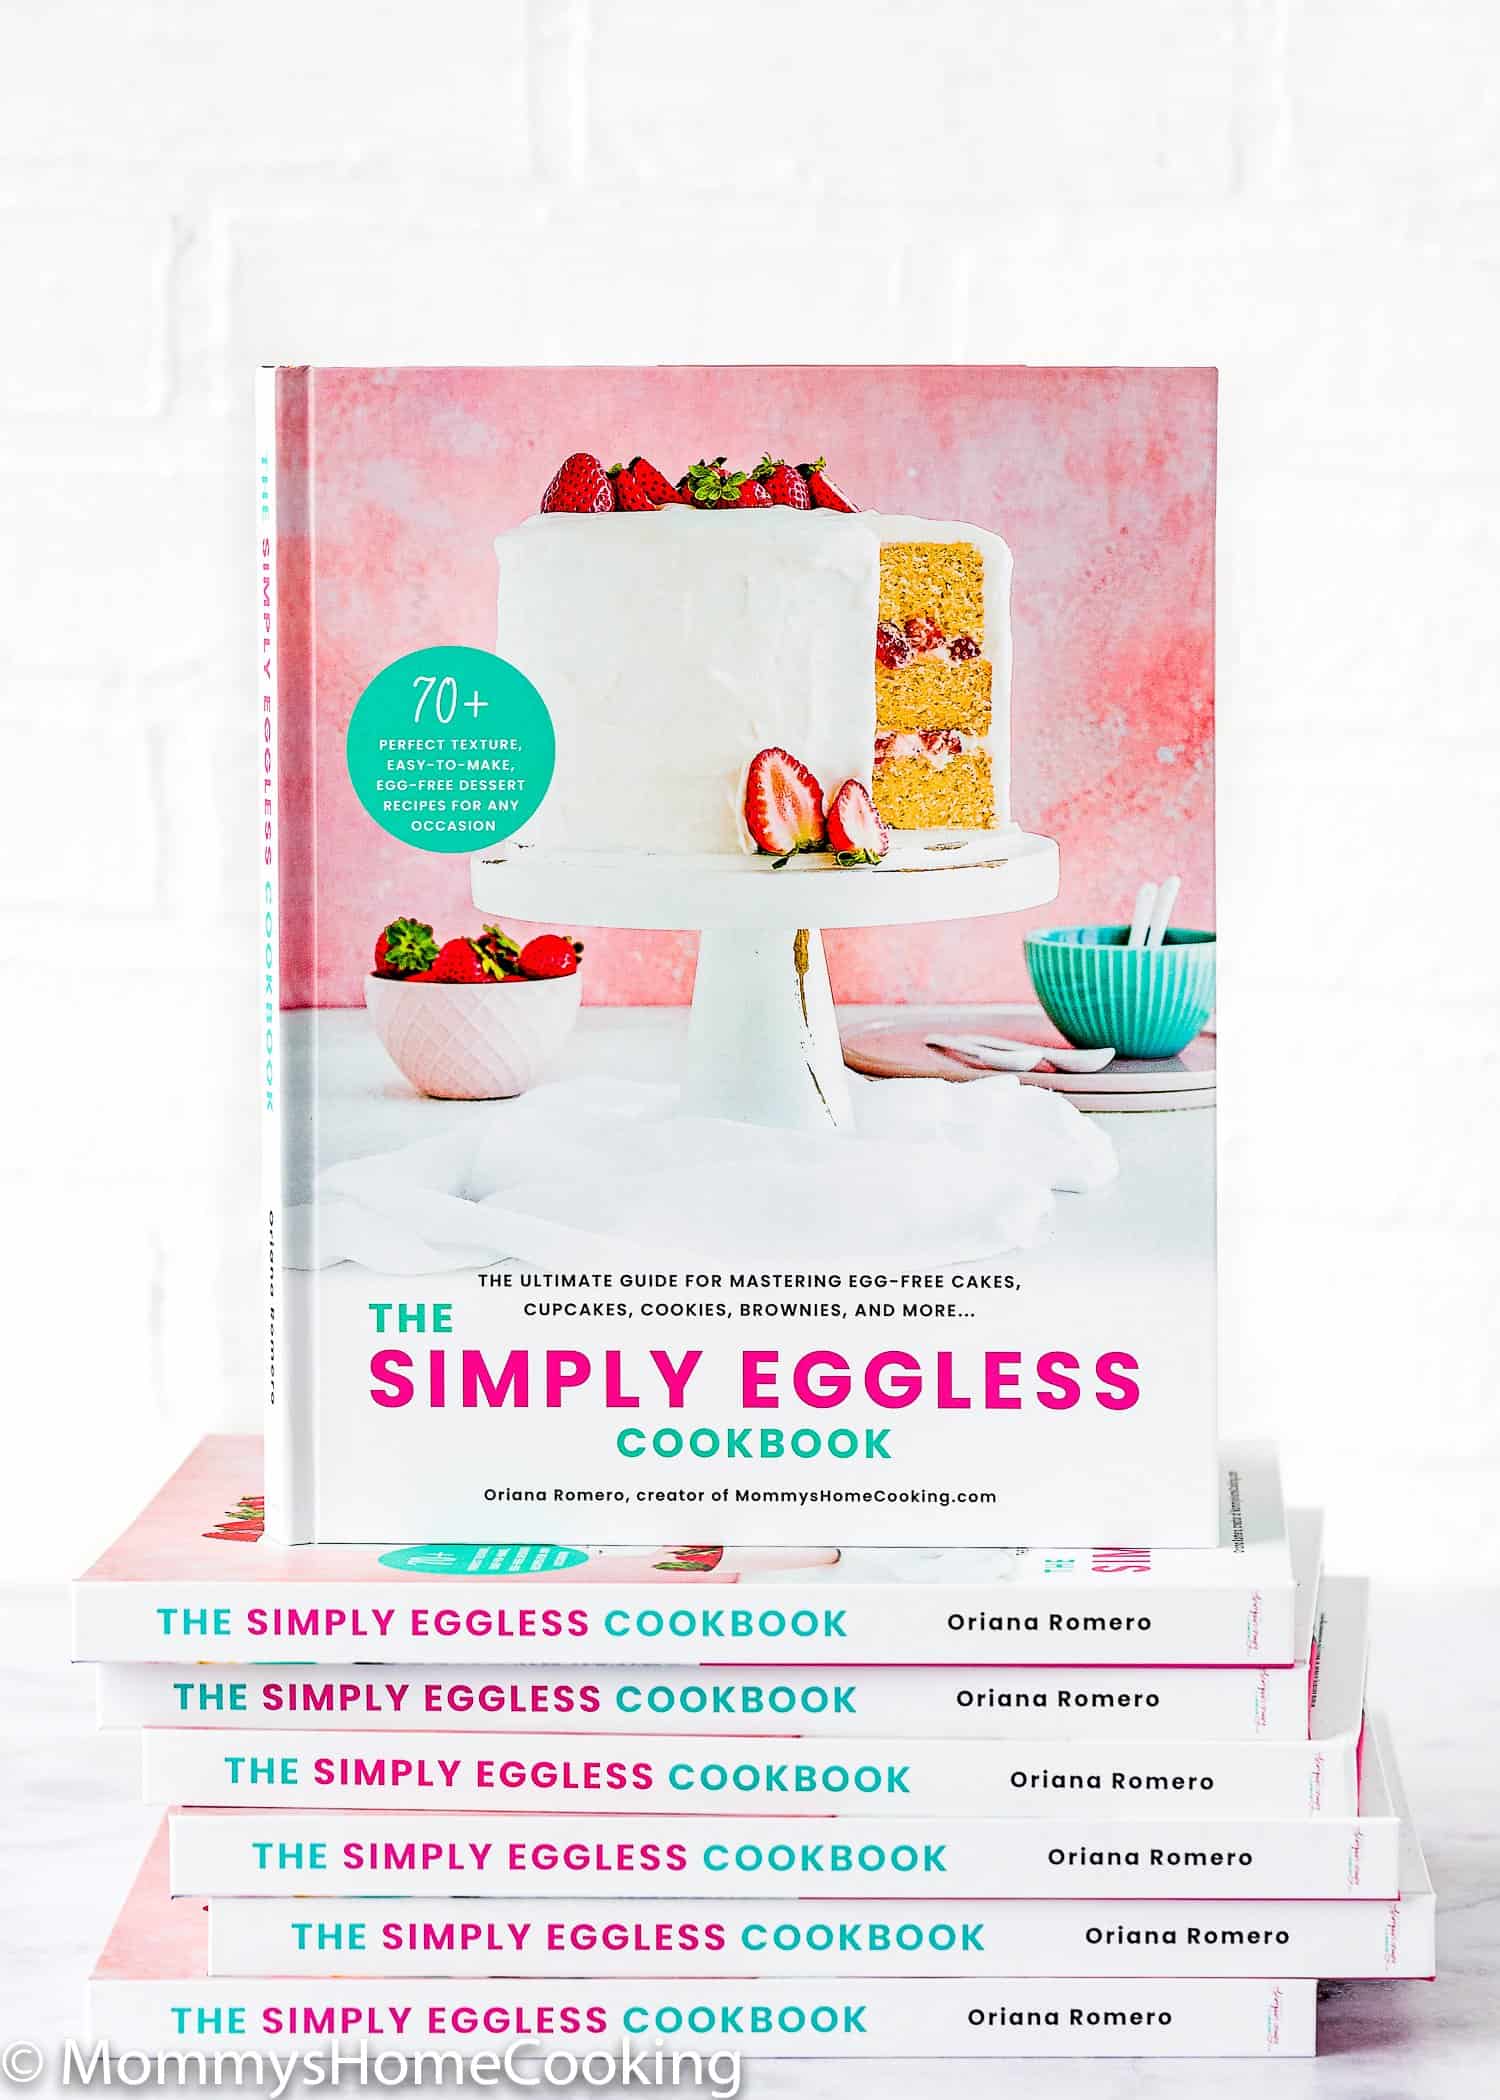 The Simply Eggless Cookbook stack